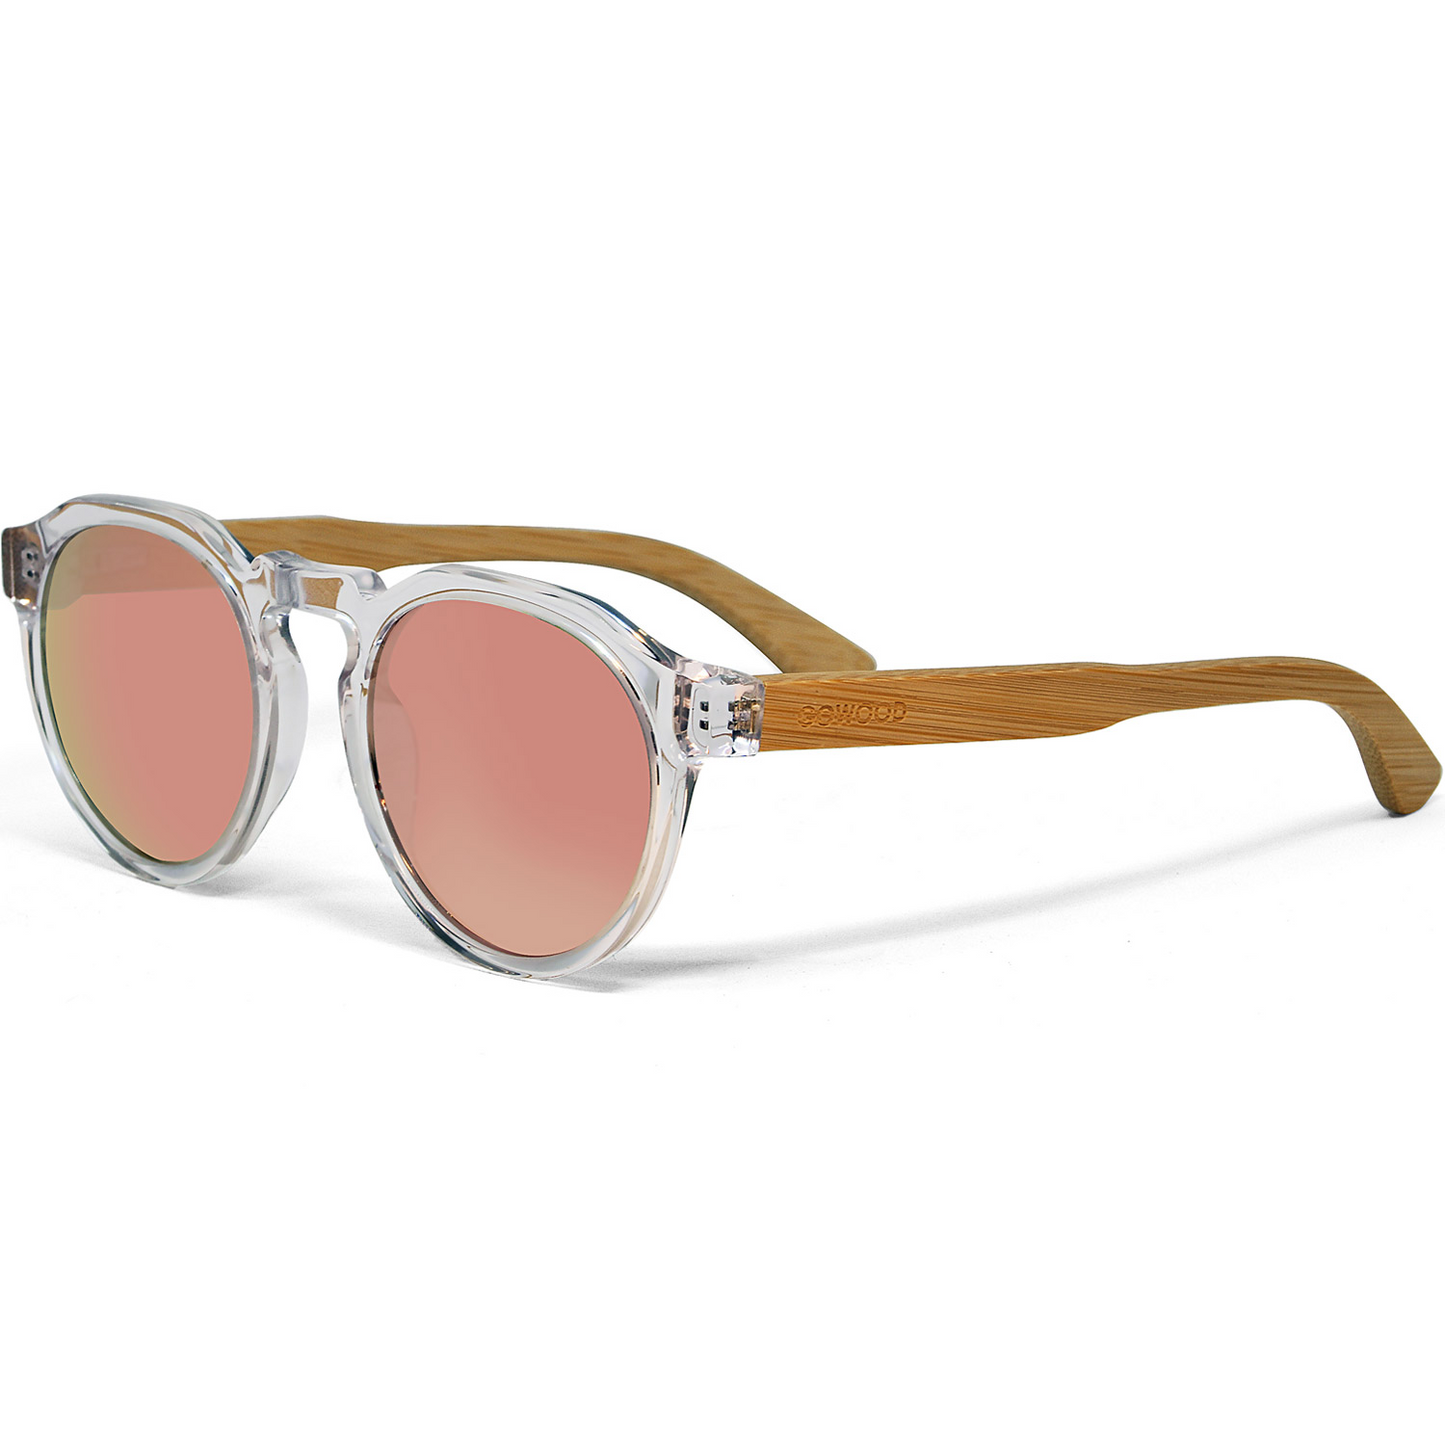 Bamboo wood panto sunglasses with clear transparent frame and pink mirrored polarized lenses